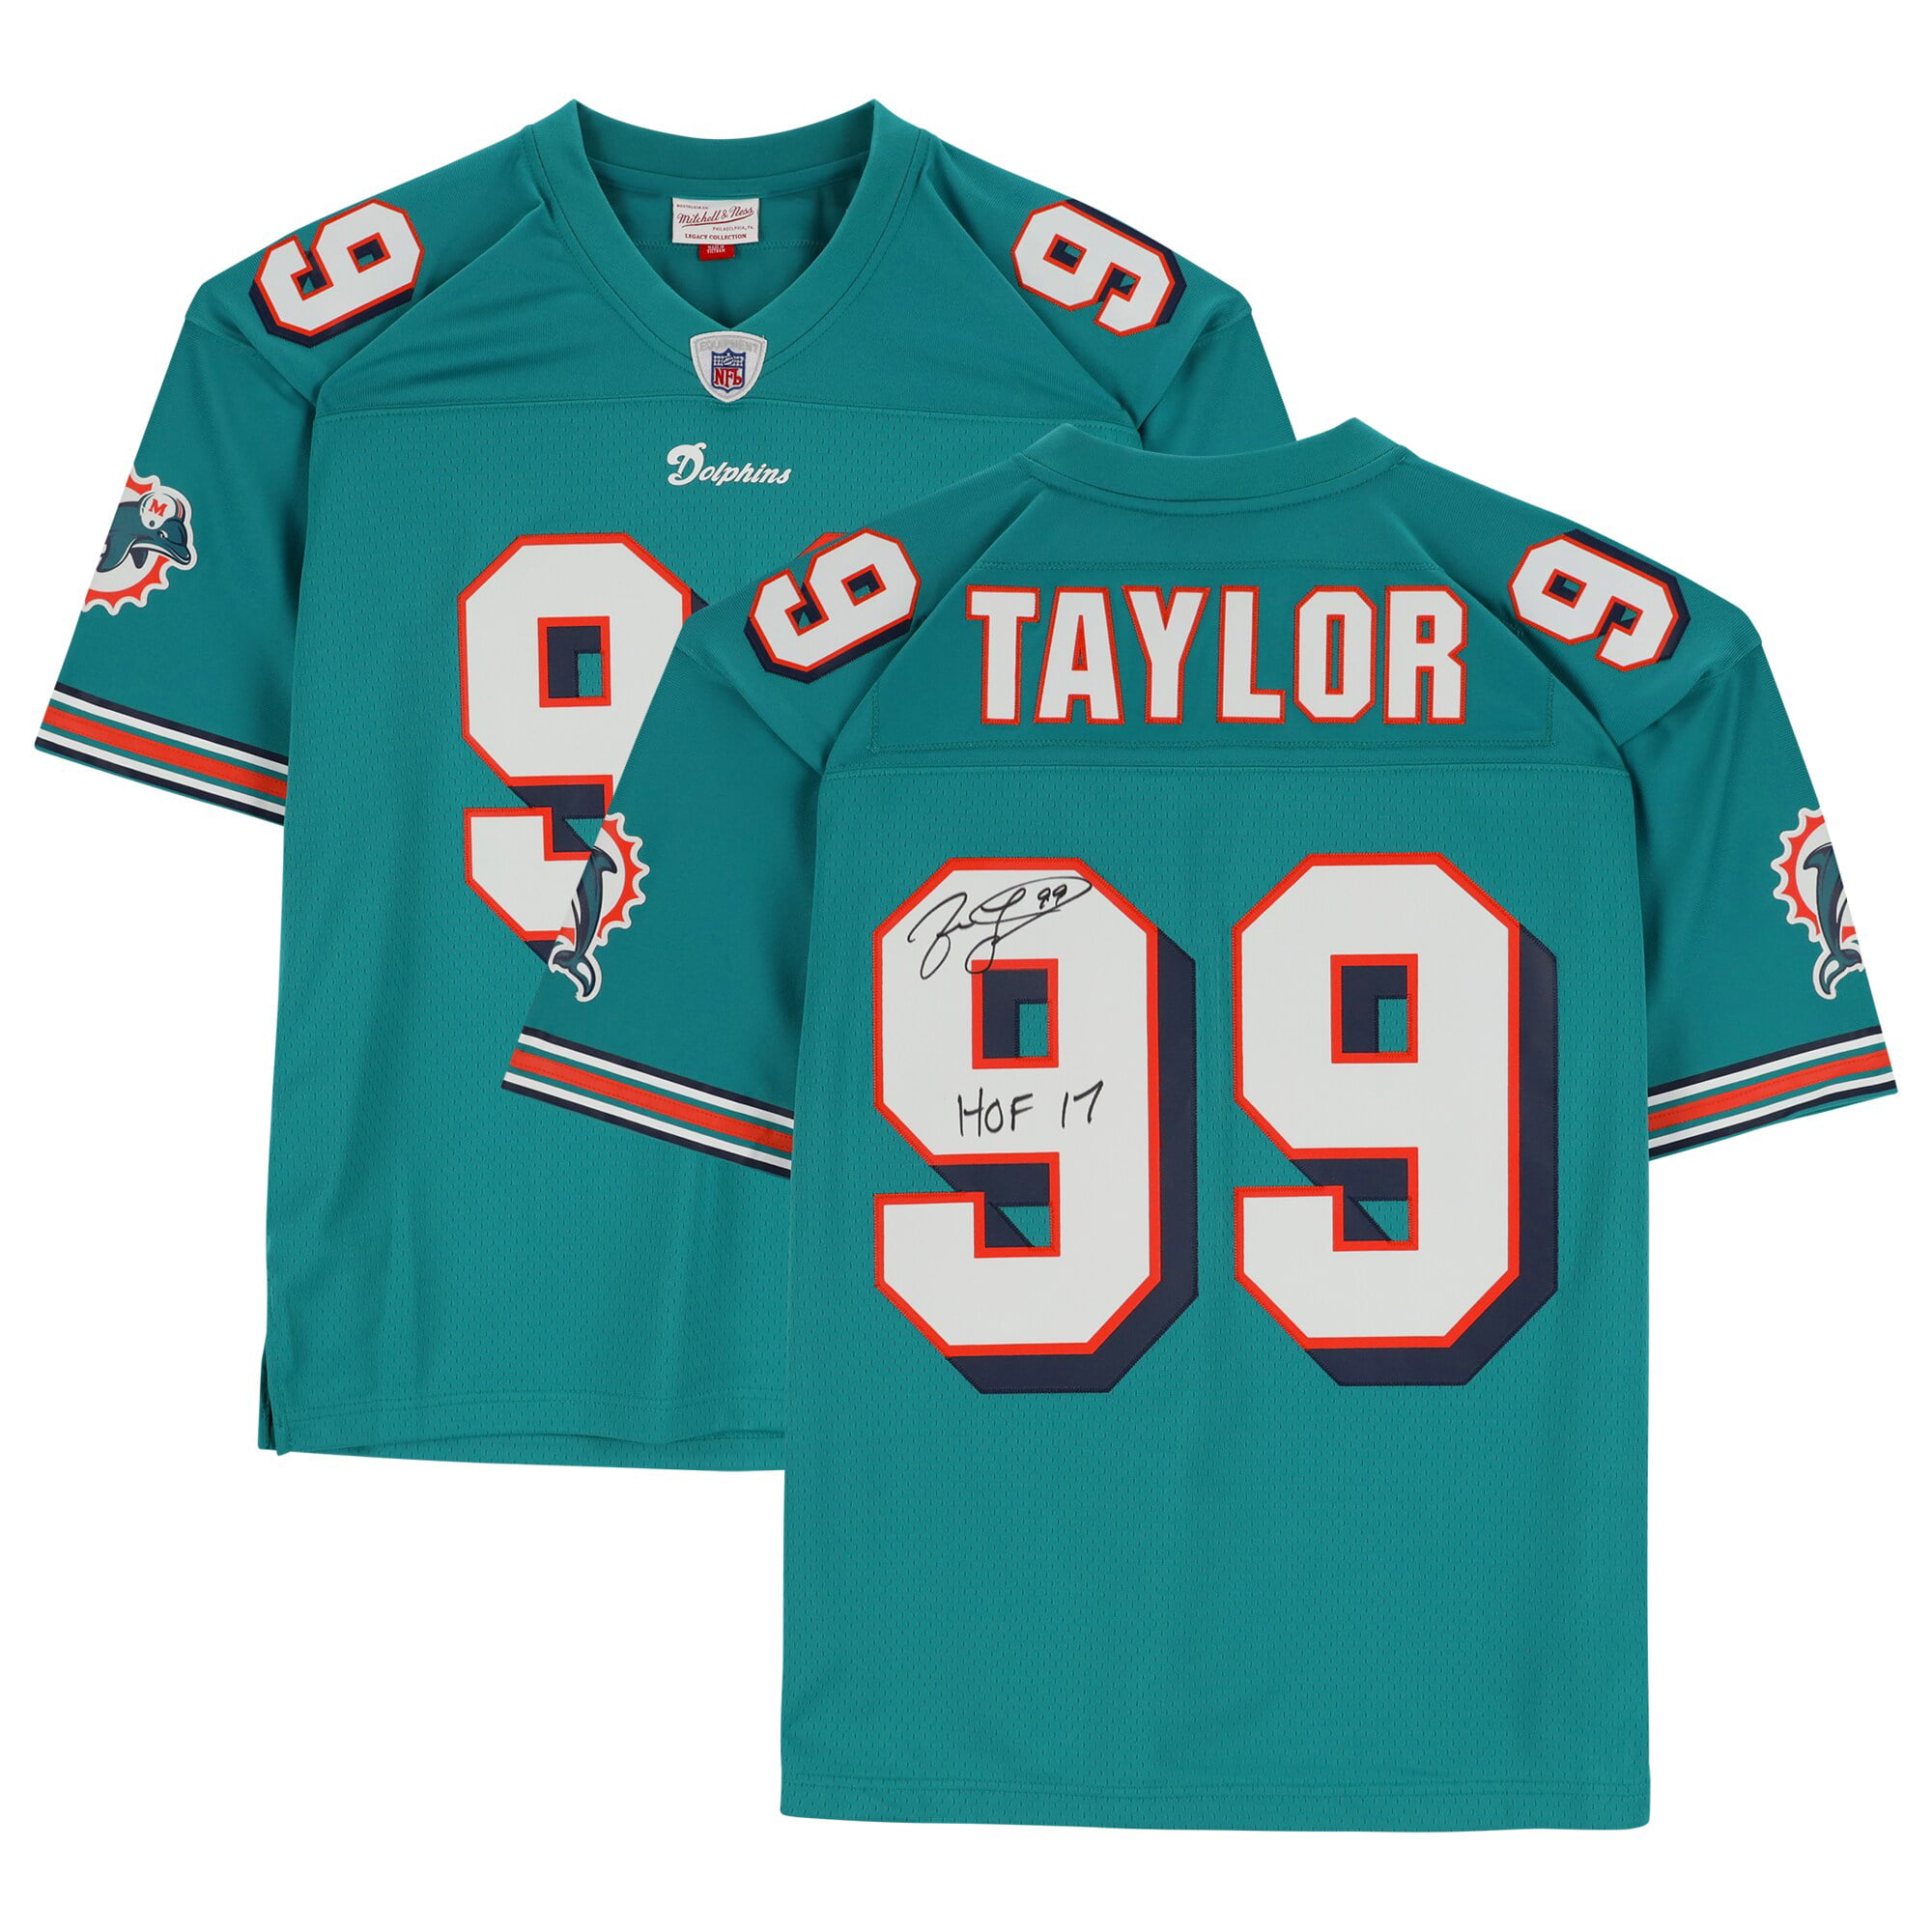 miami dolphins red jersey